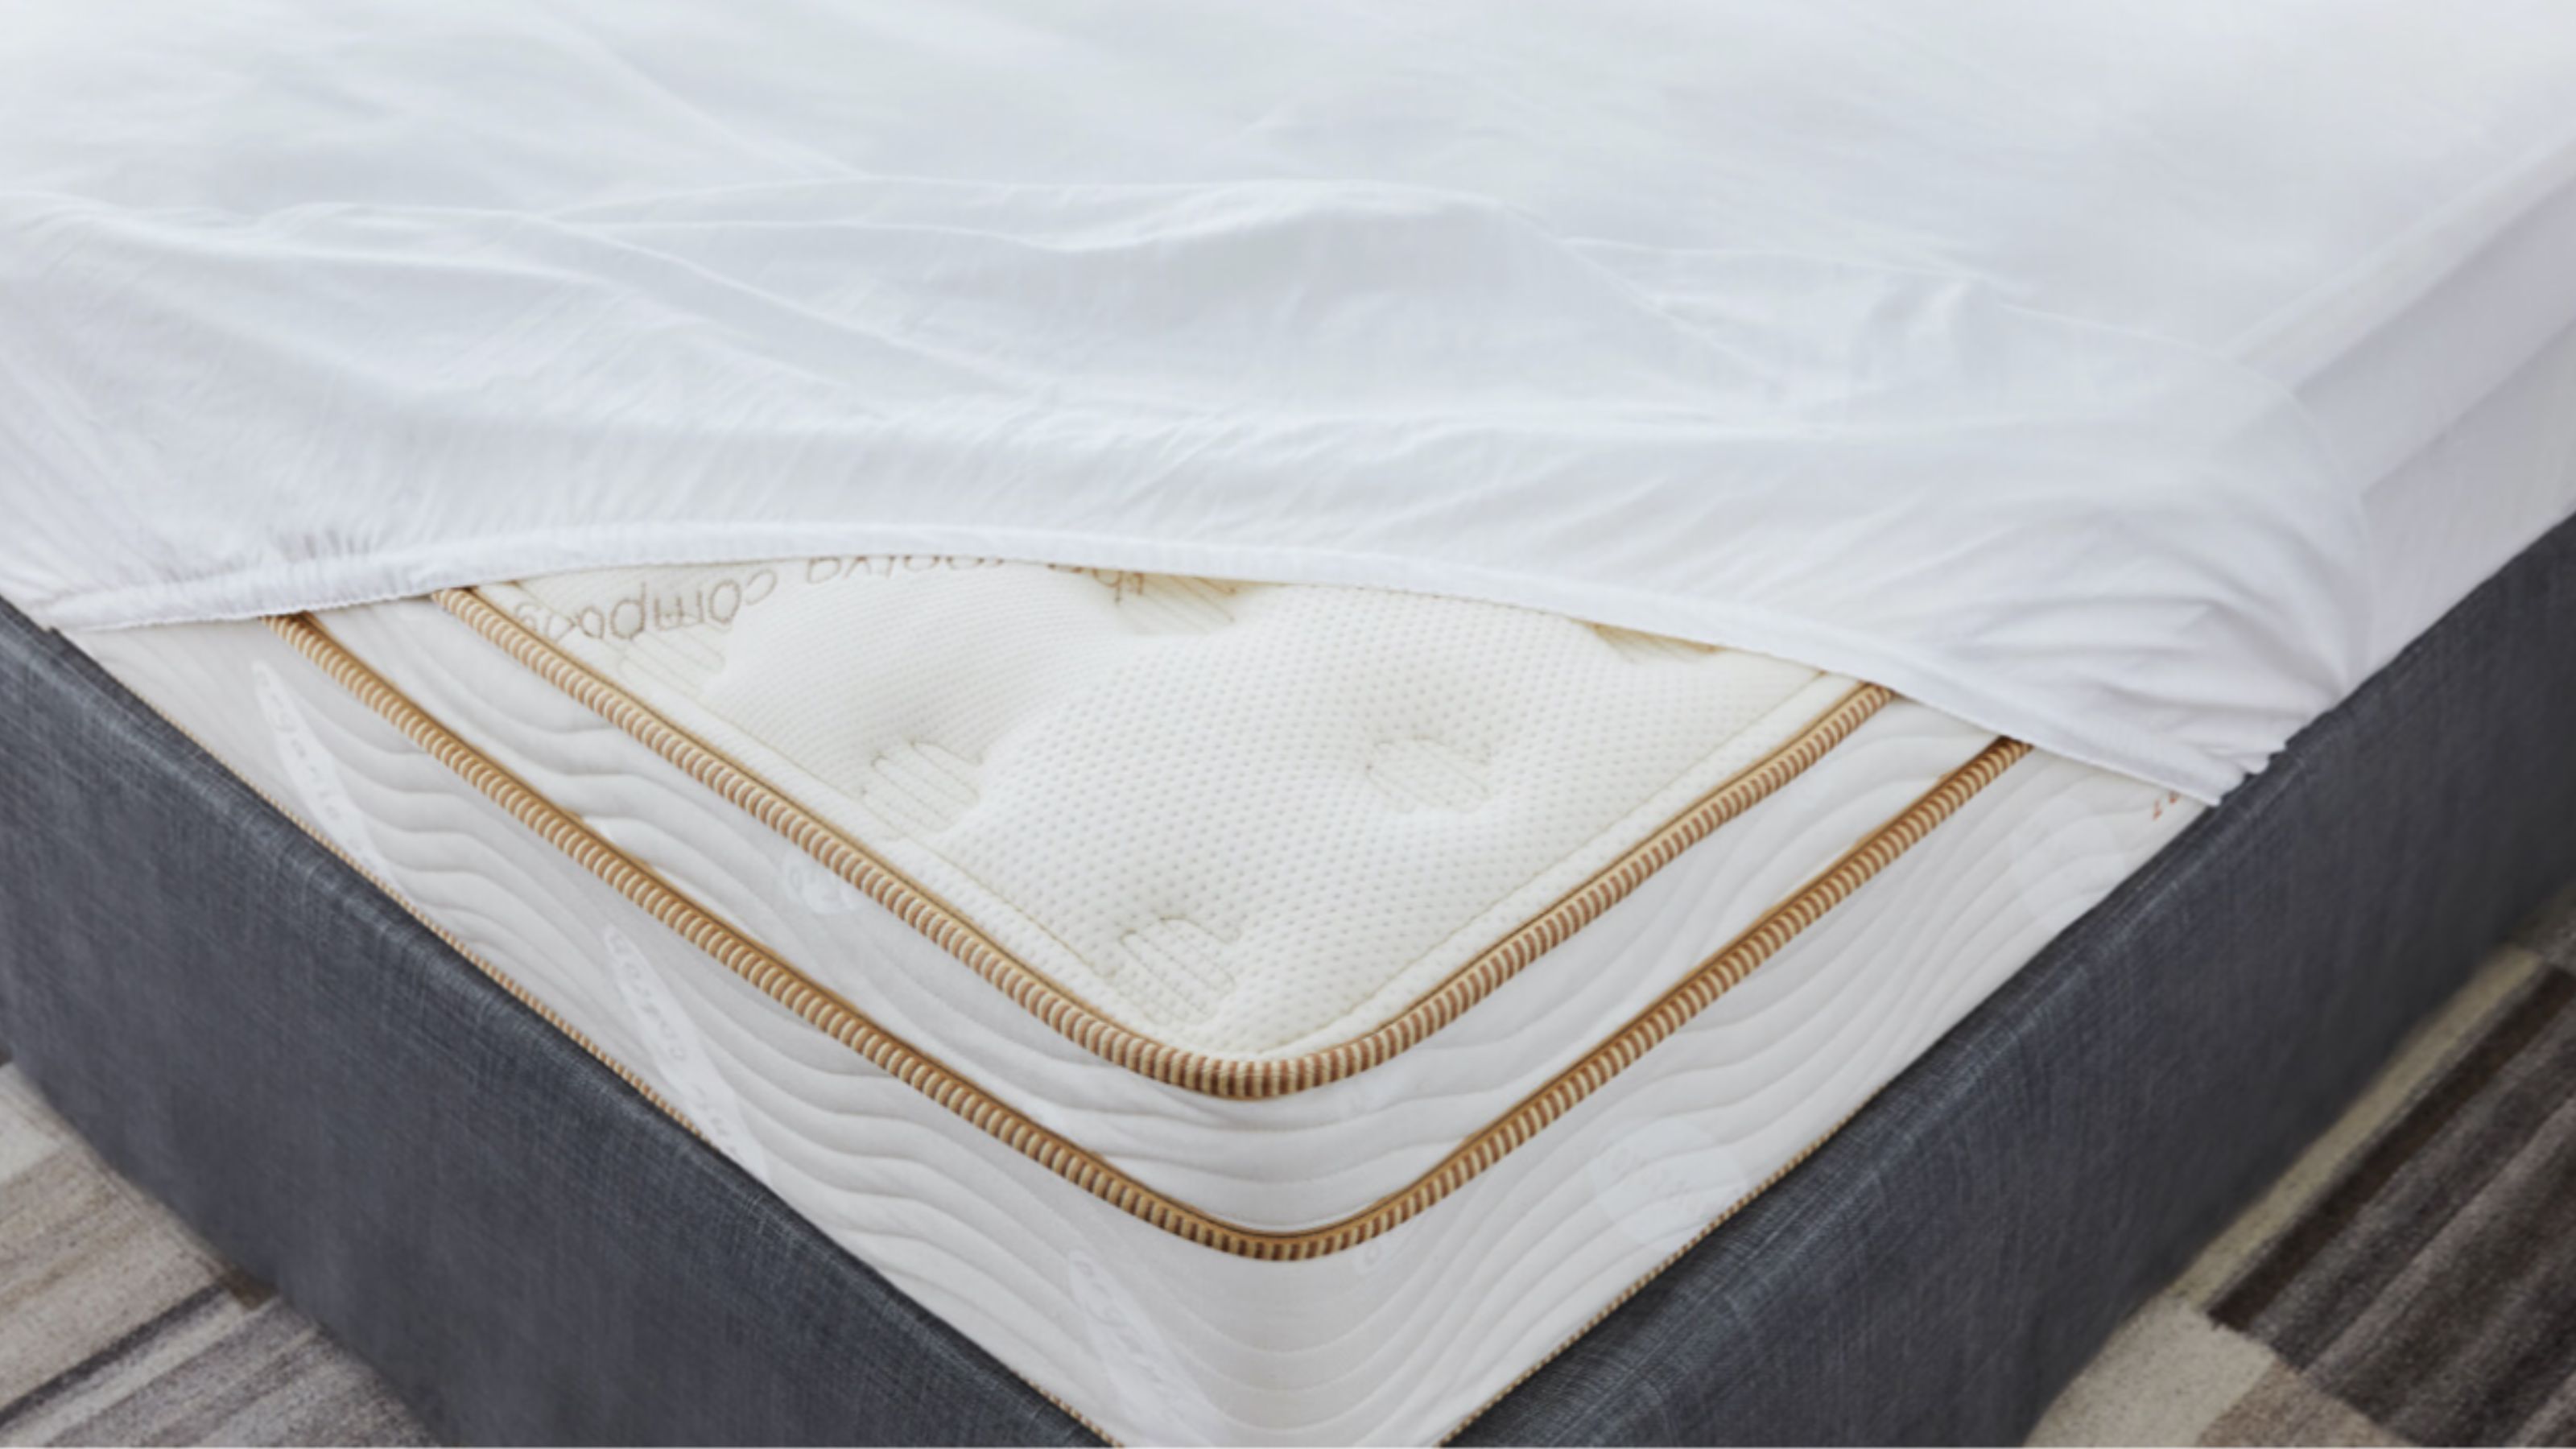 Mattress pad vs mattress topper: what's the difference?